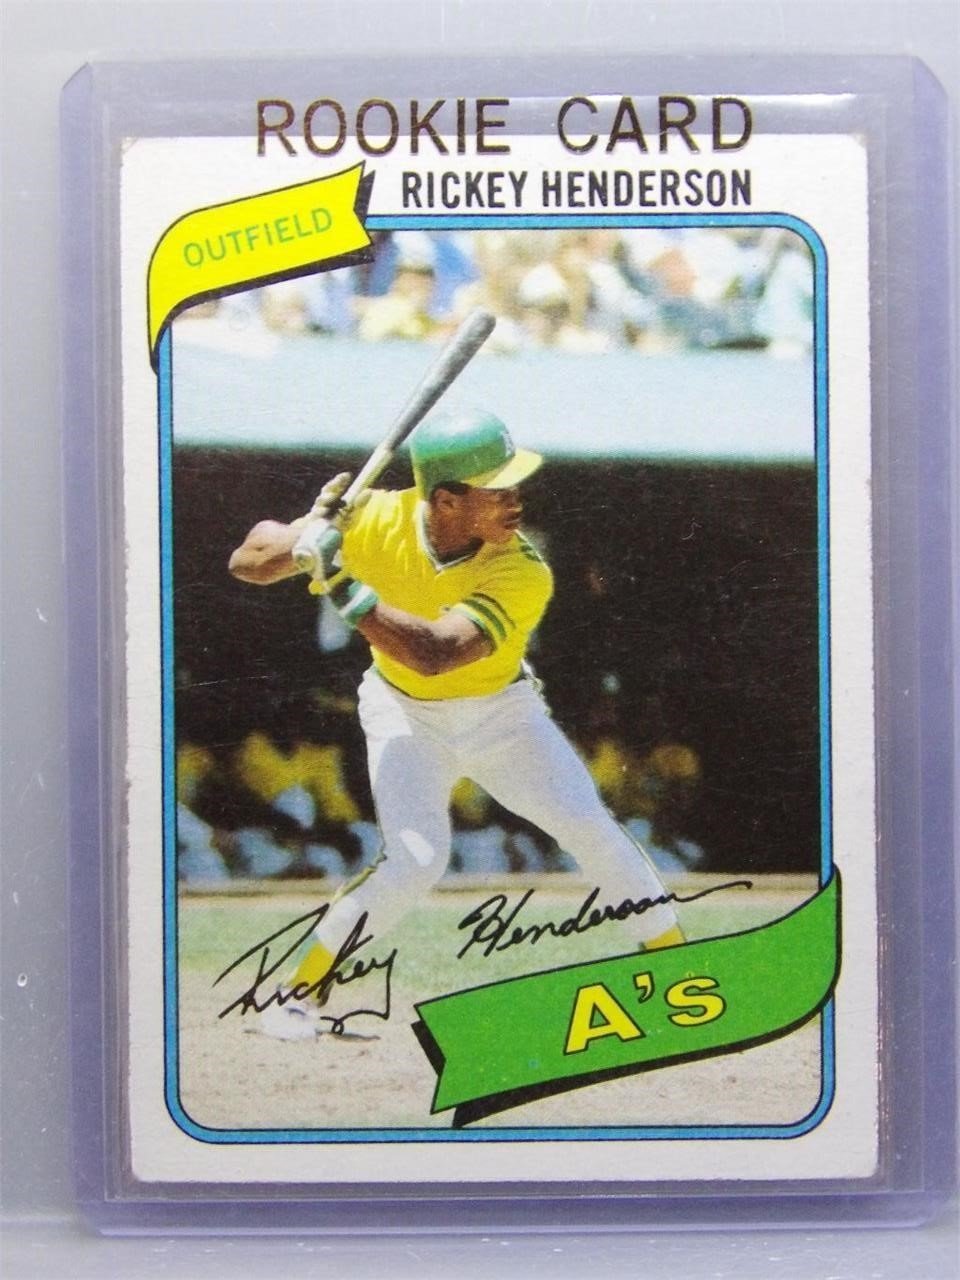 Sports Card Auction Ending May 26th at 7:00 PM Central